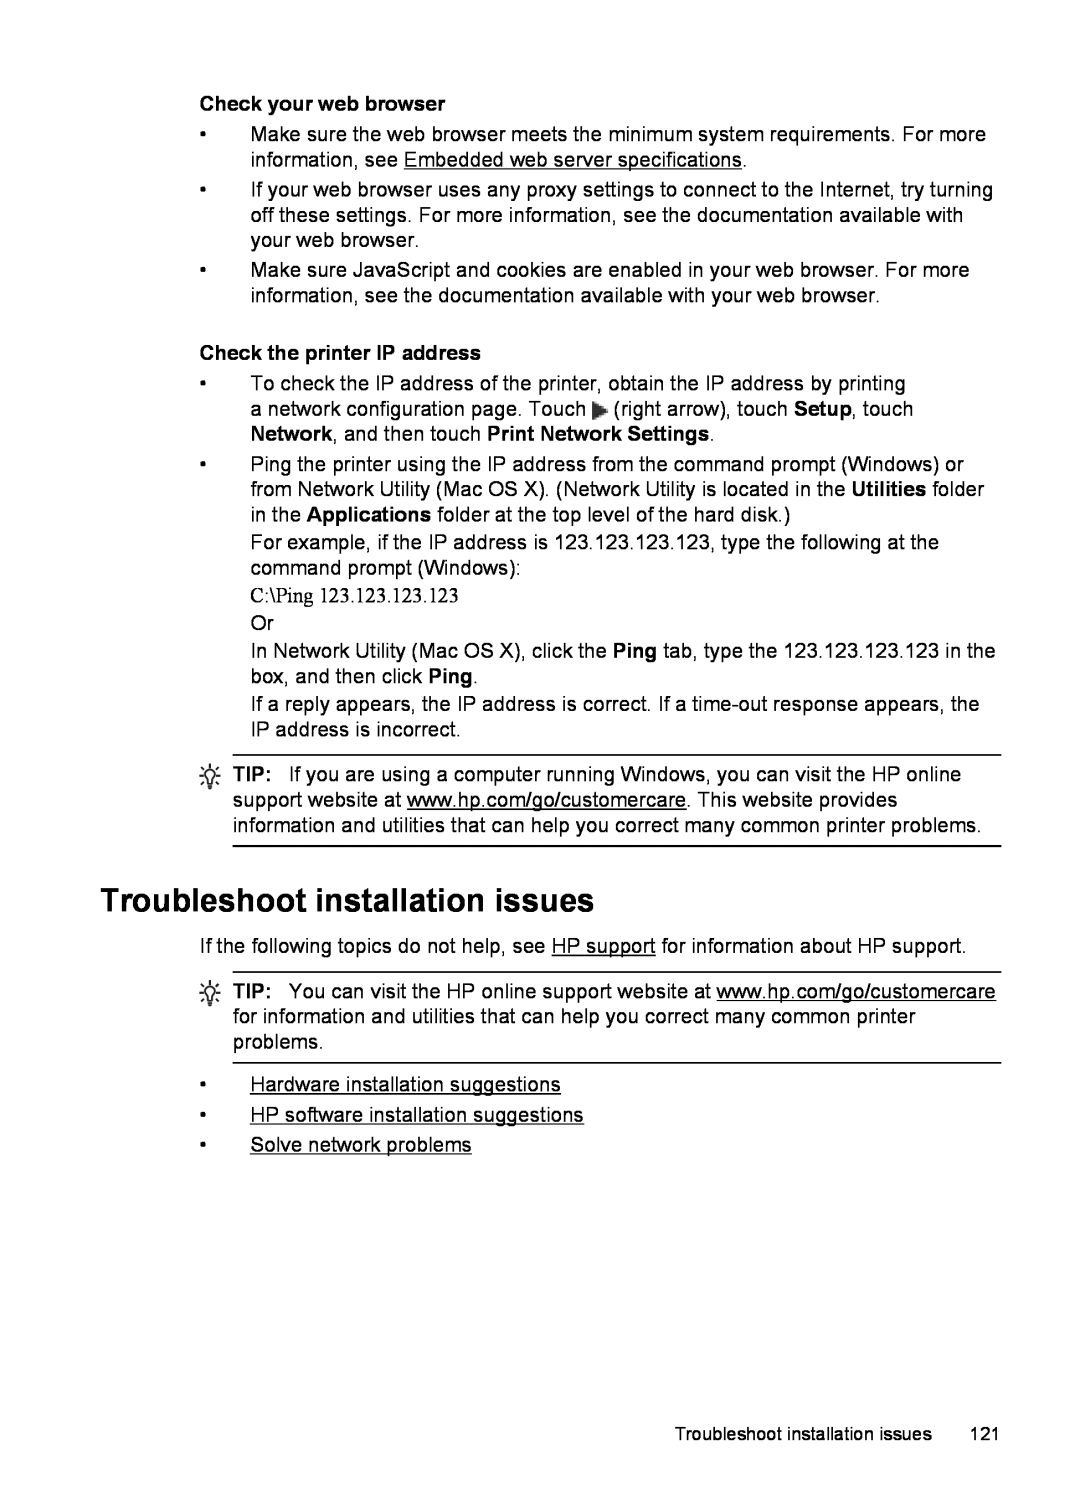 HP 6600 - H7 manual Troubleshoot installation issues, Check your web browser, Check the printer IP address 